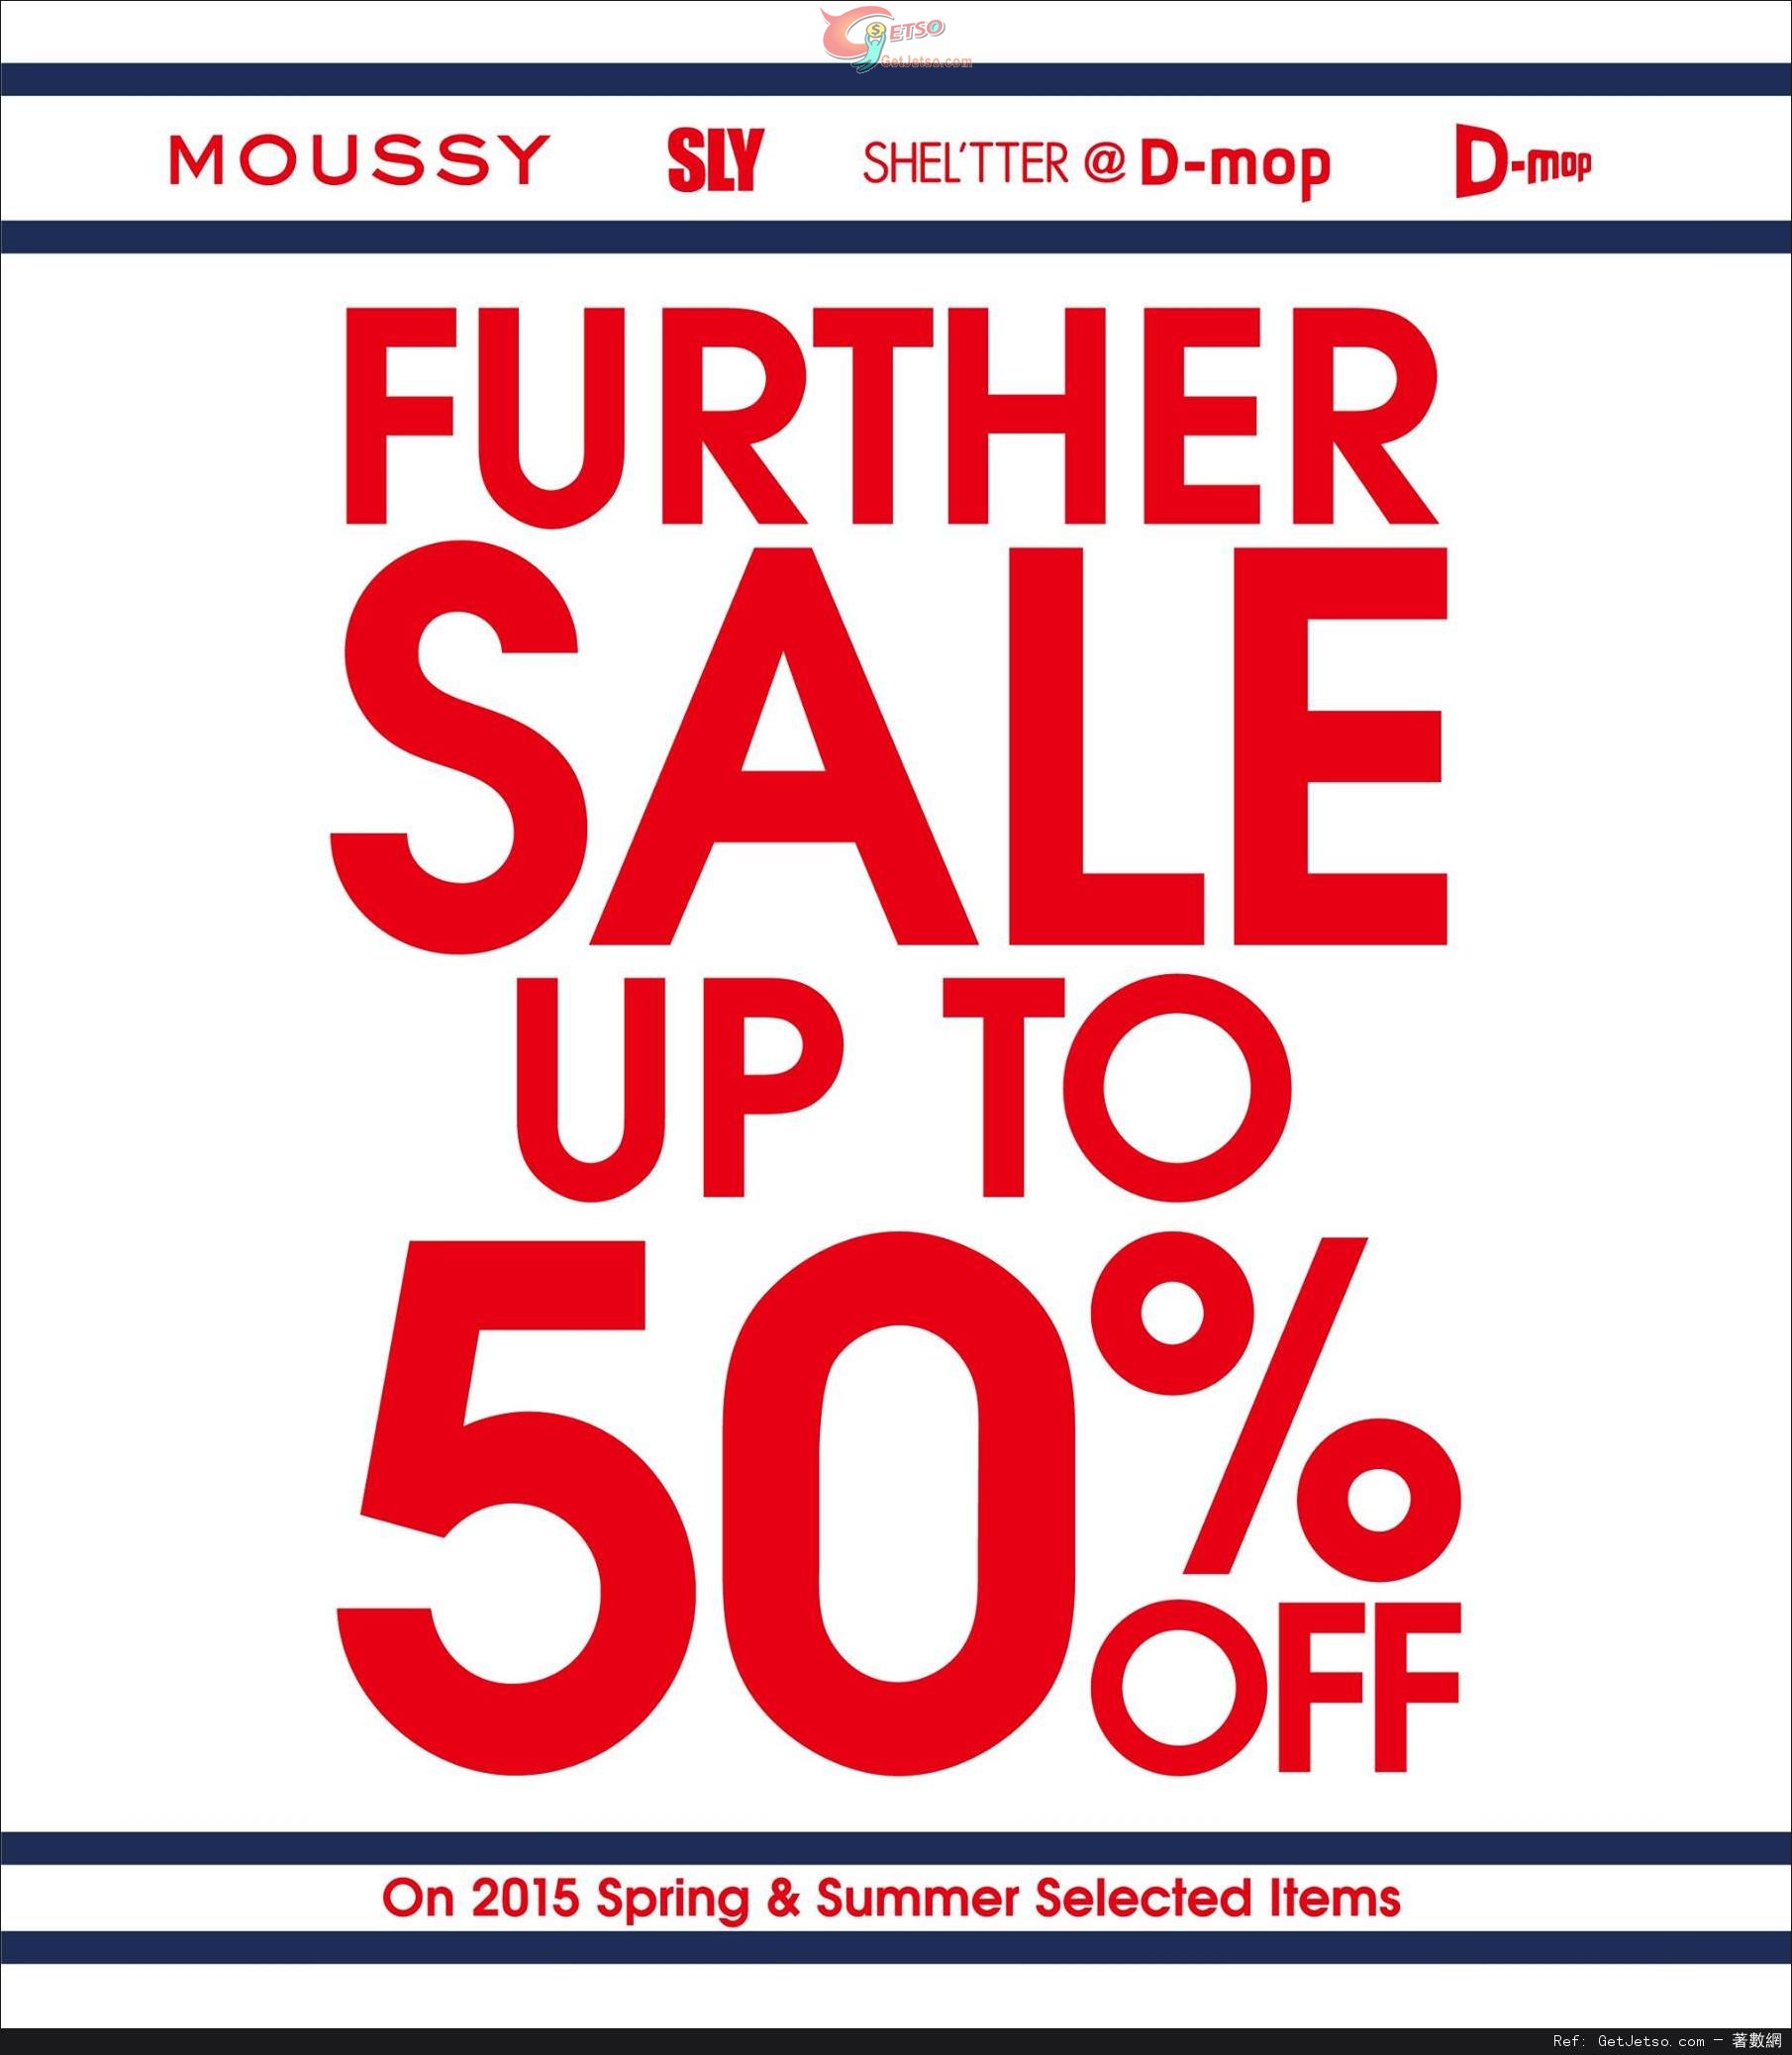 D-mop / MOUSSY / SLY Further Sale低至半價優惠(至15年6月30日)圖片1